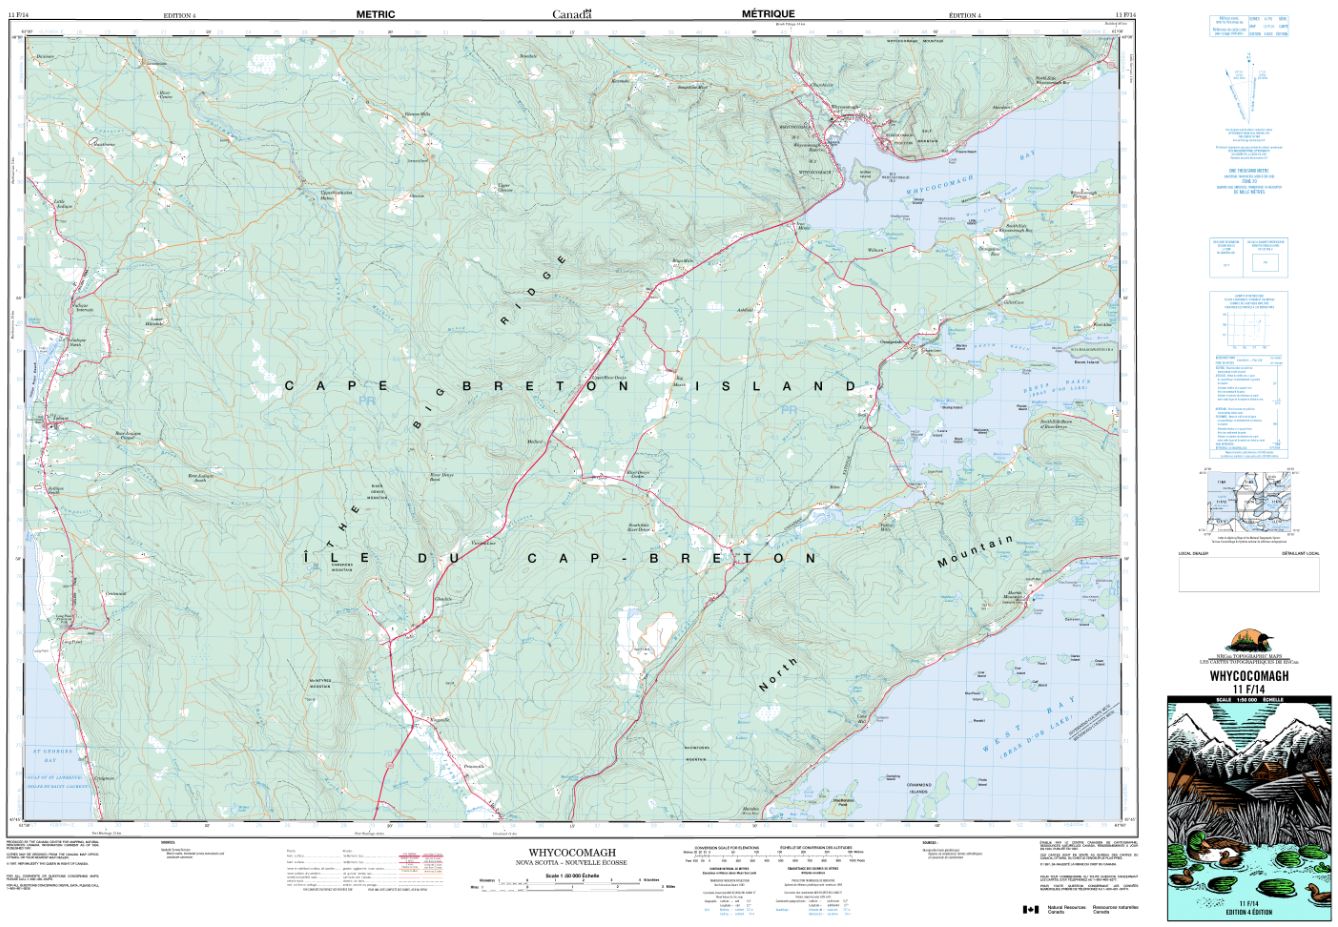 11F/14 Whycocomagh Topographic Map Nova Scotia Tyvek